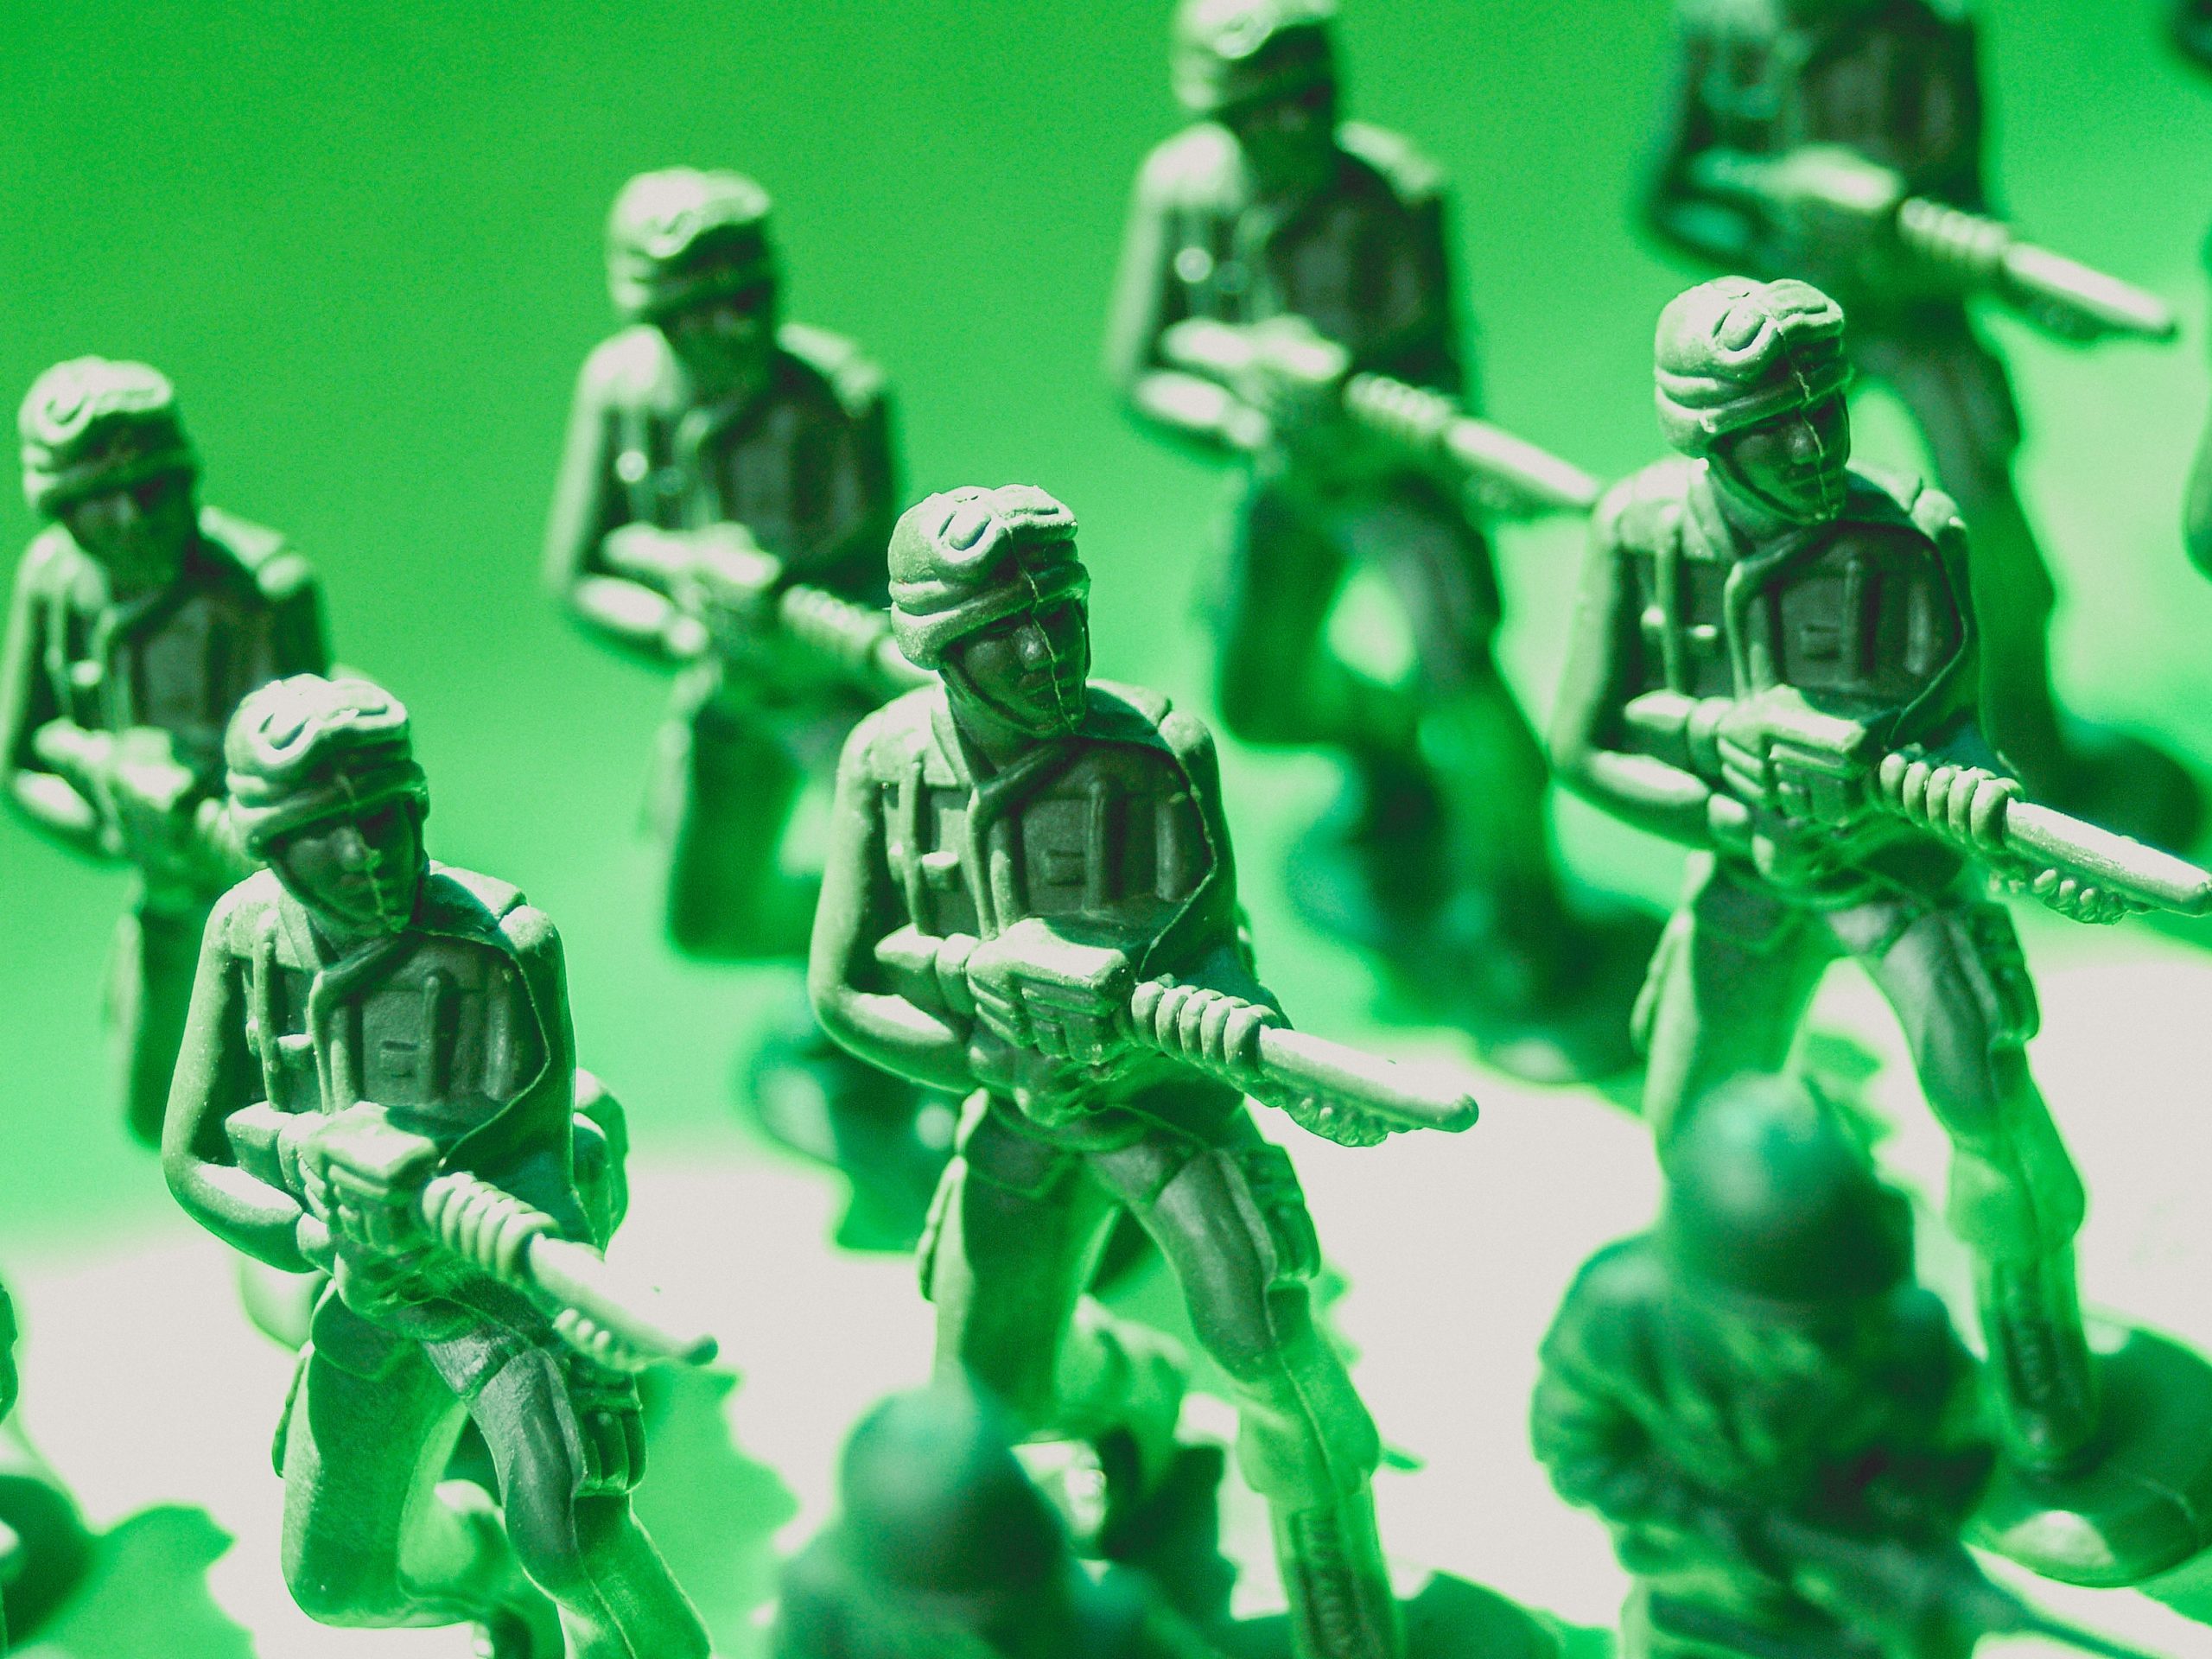 Green toy soldiers stand in position ready to fight off other toy soldiers similar to the way breach and attack simulation services must detect and fend off threats.